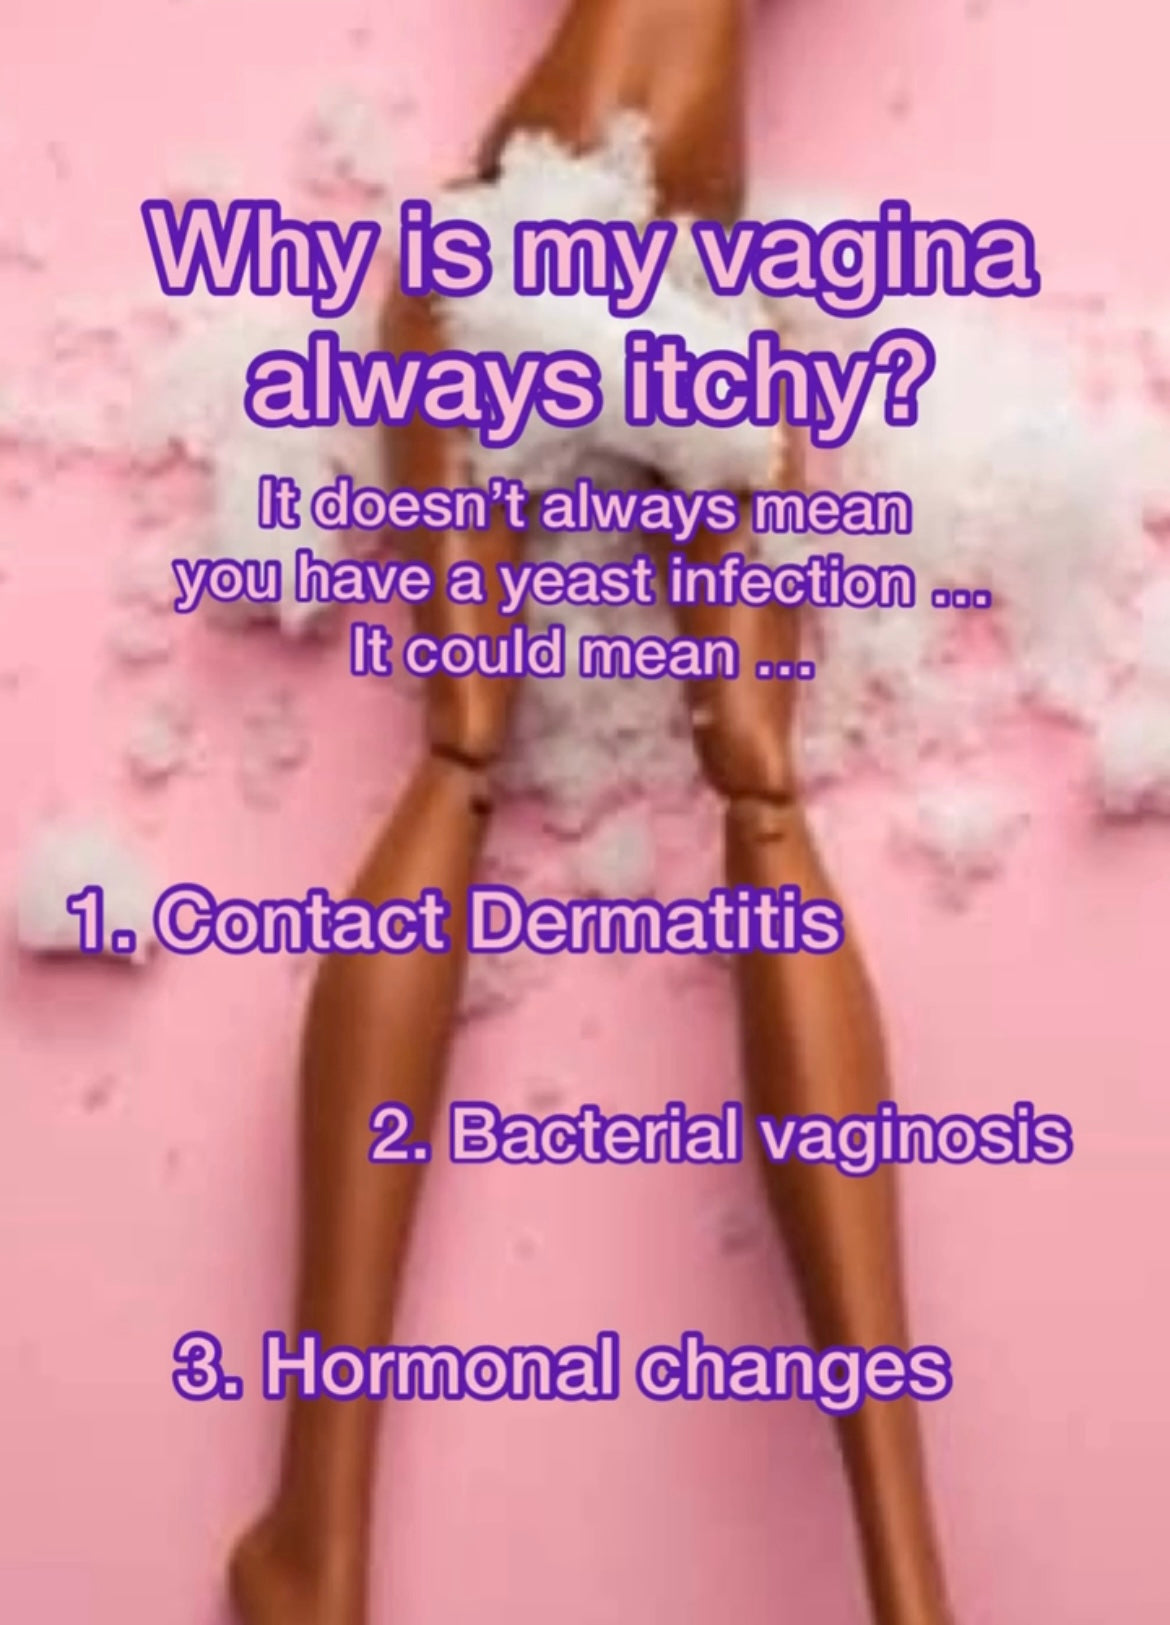 Itchy vagina after swimming in a pool?